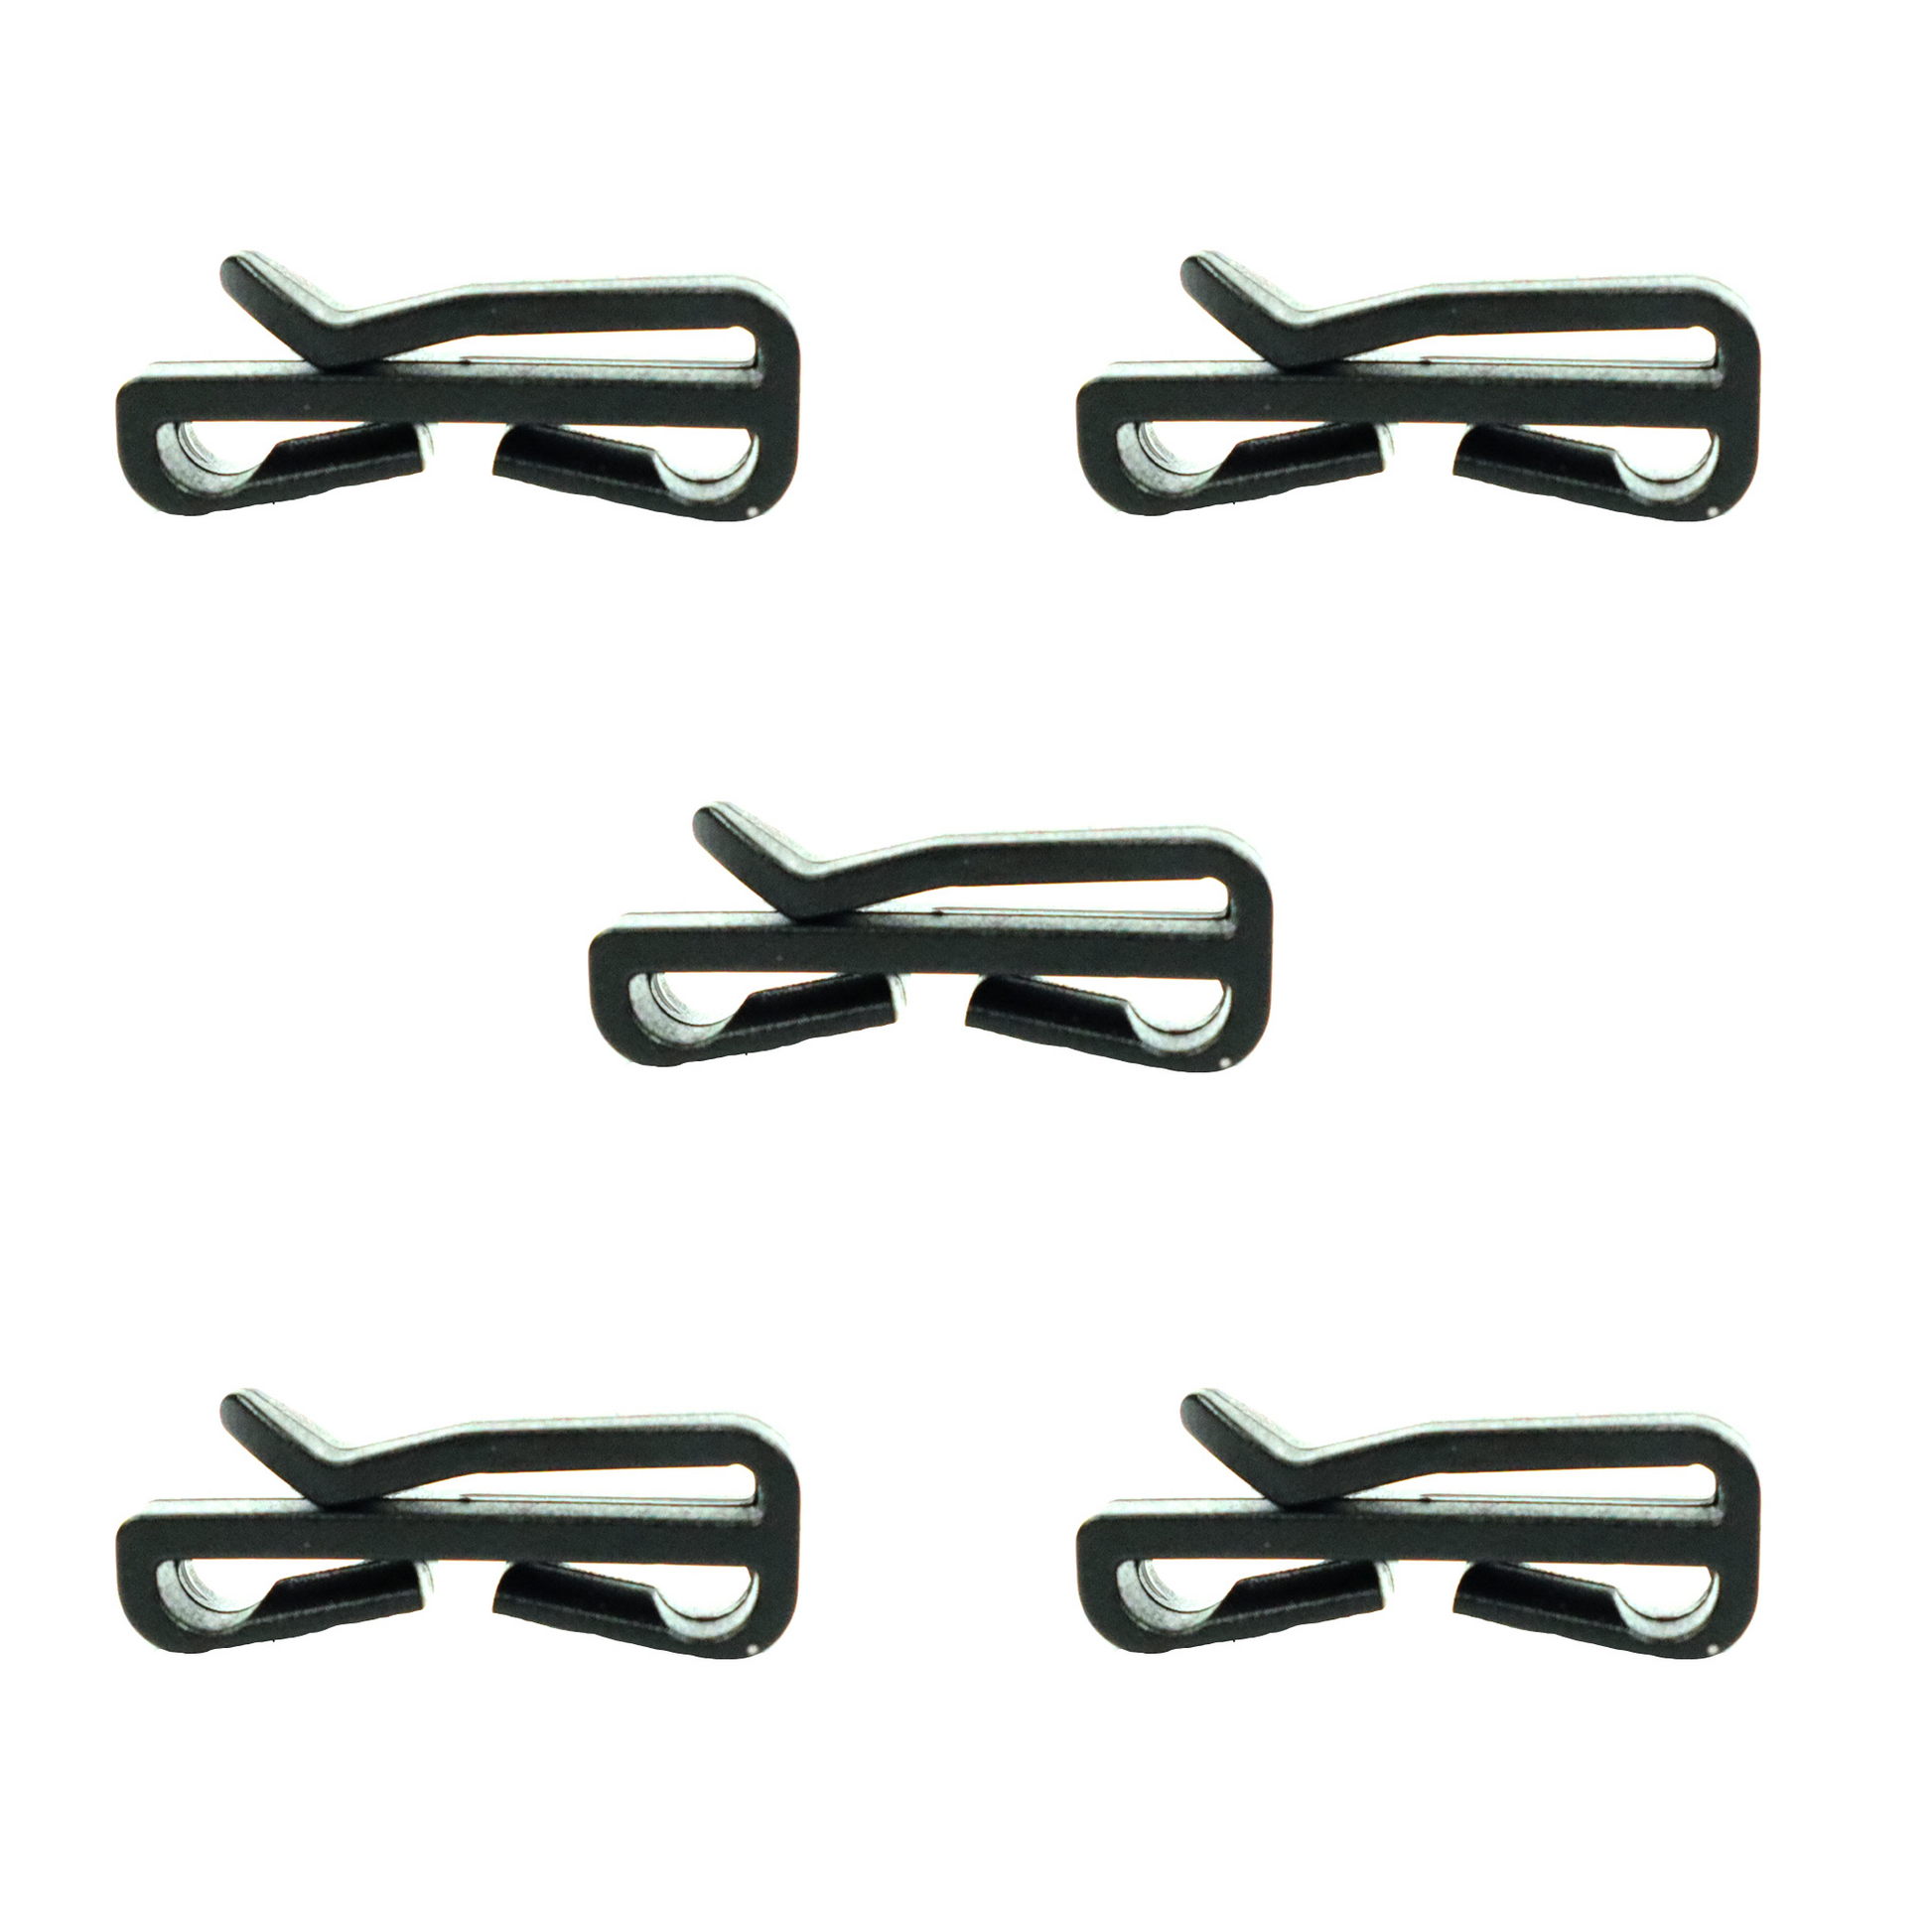 5 Pack of Molle Webbing Clips